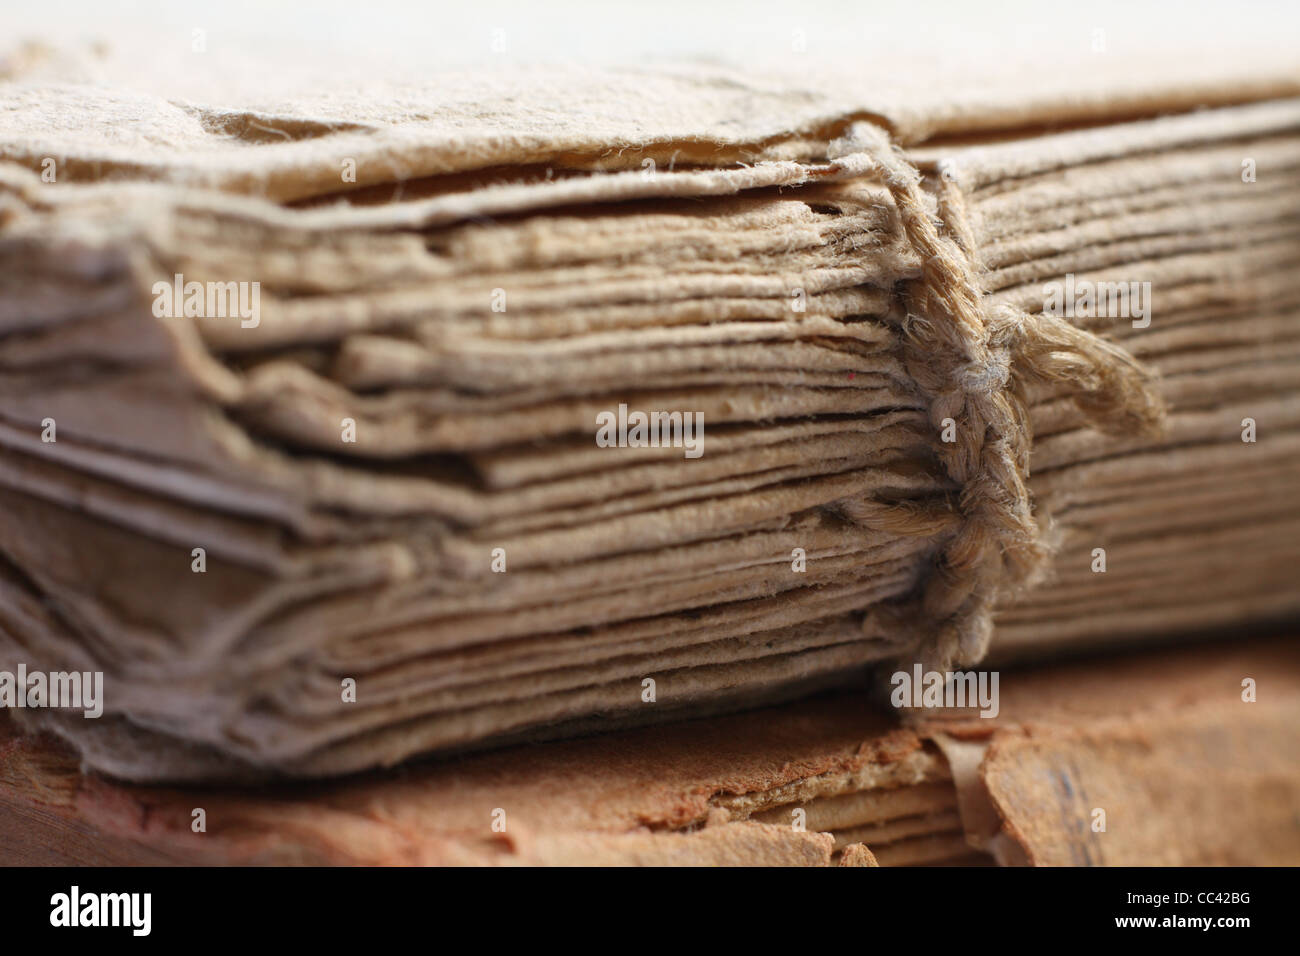 Examples of book binding and book binding tools and machinery from the 18th  and 19th centuries Stock Photo - Alamy